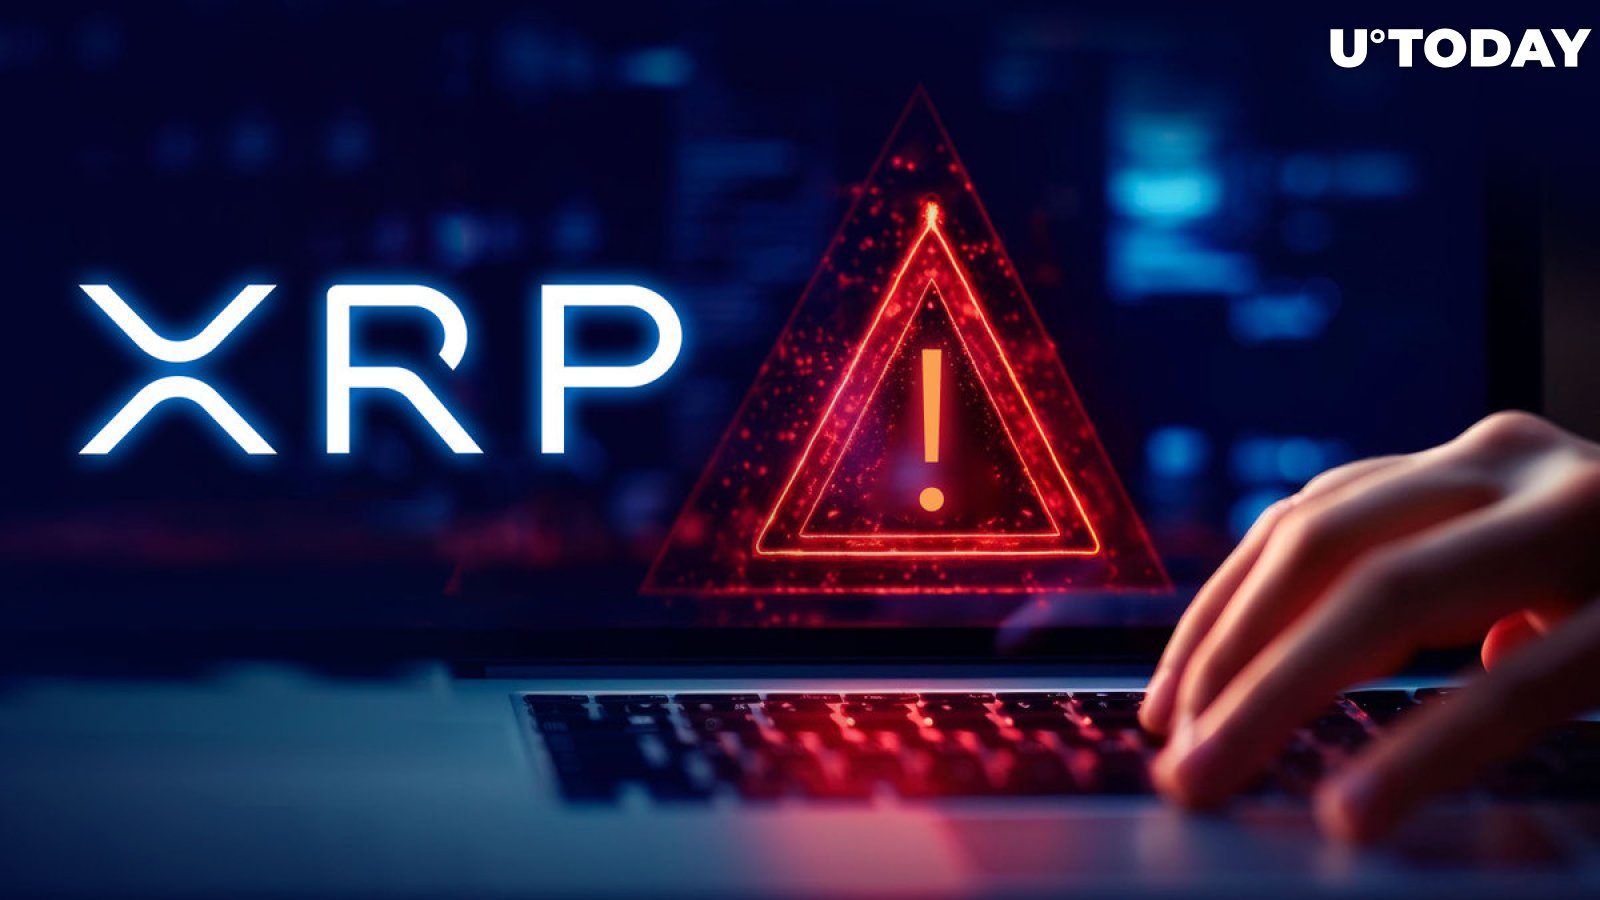 Ripple Sends Critical Message to XRP Community, What It Concerns